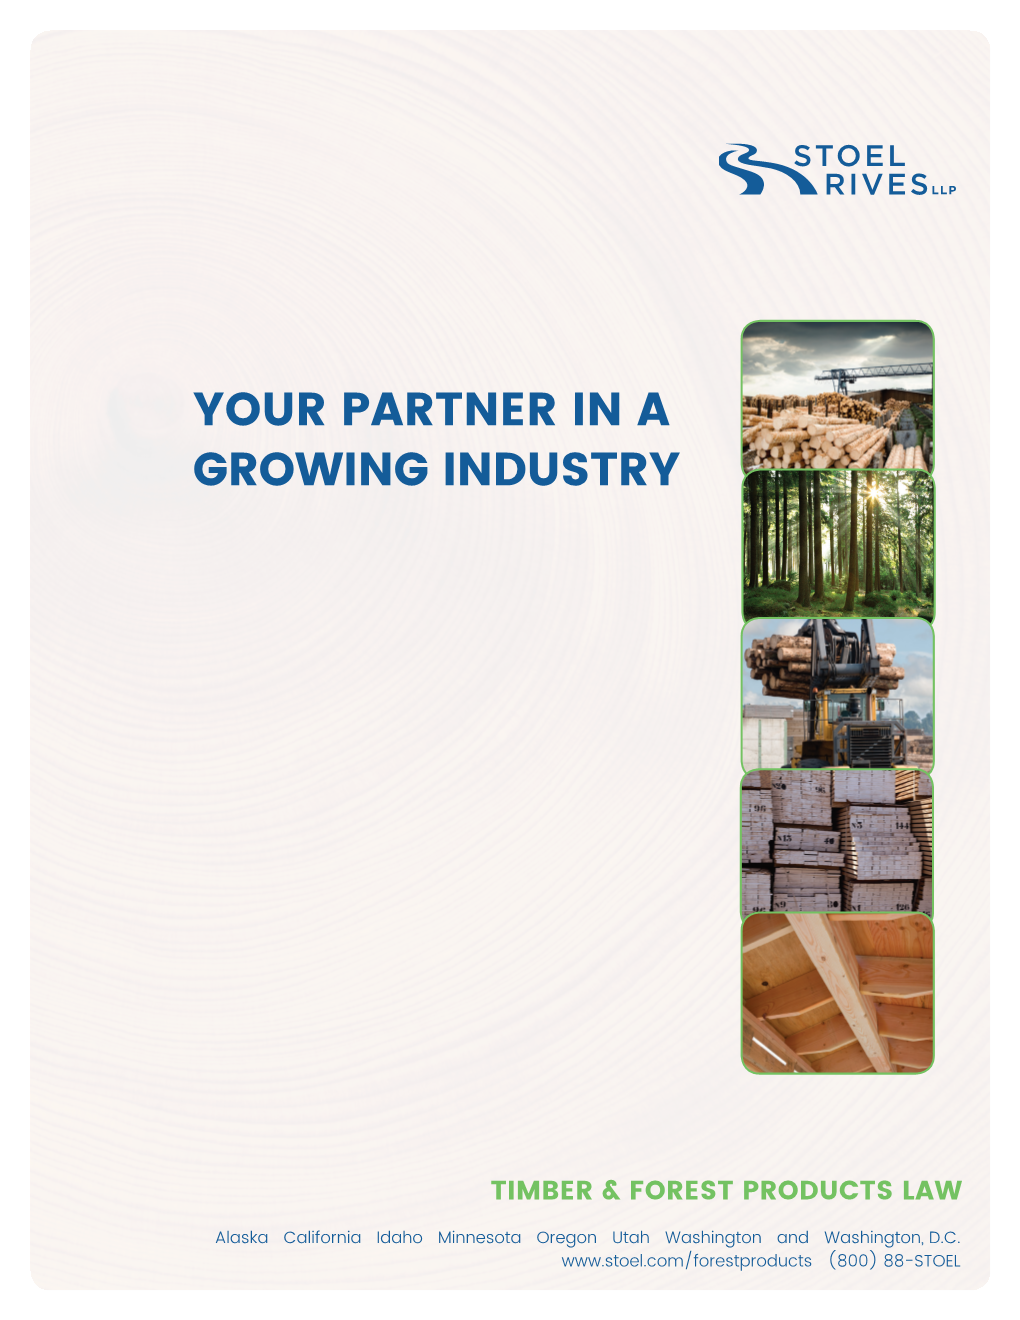 Your Partner in a Growing Industry